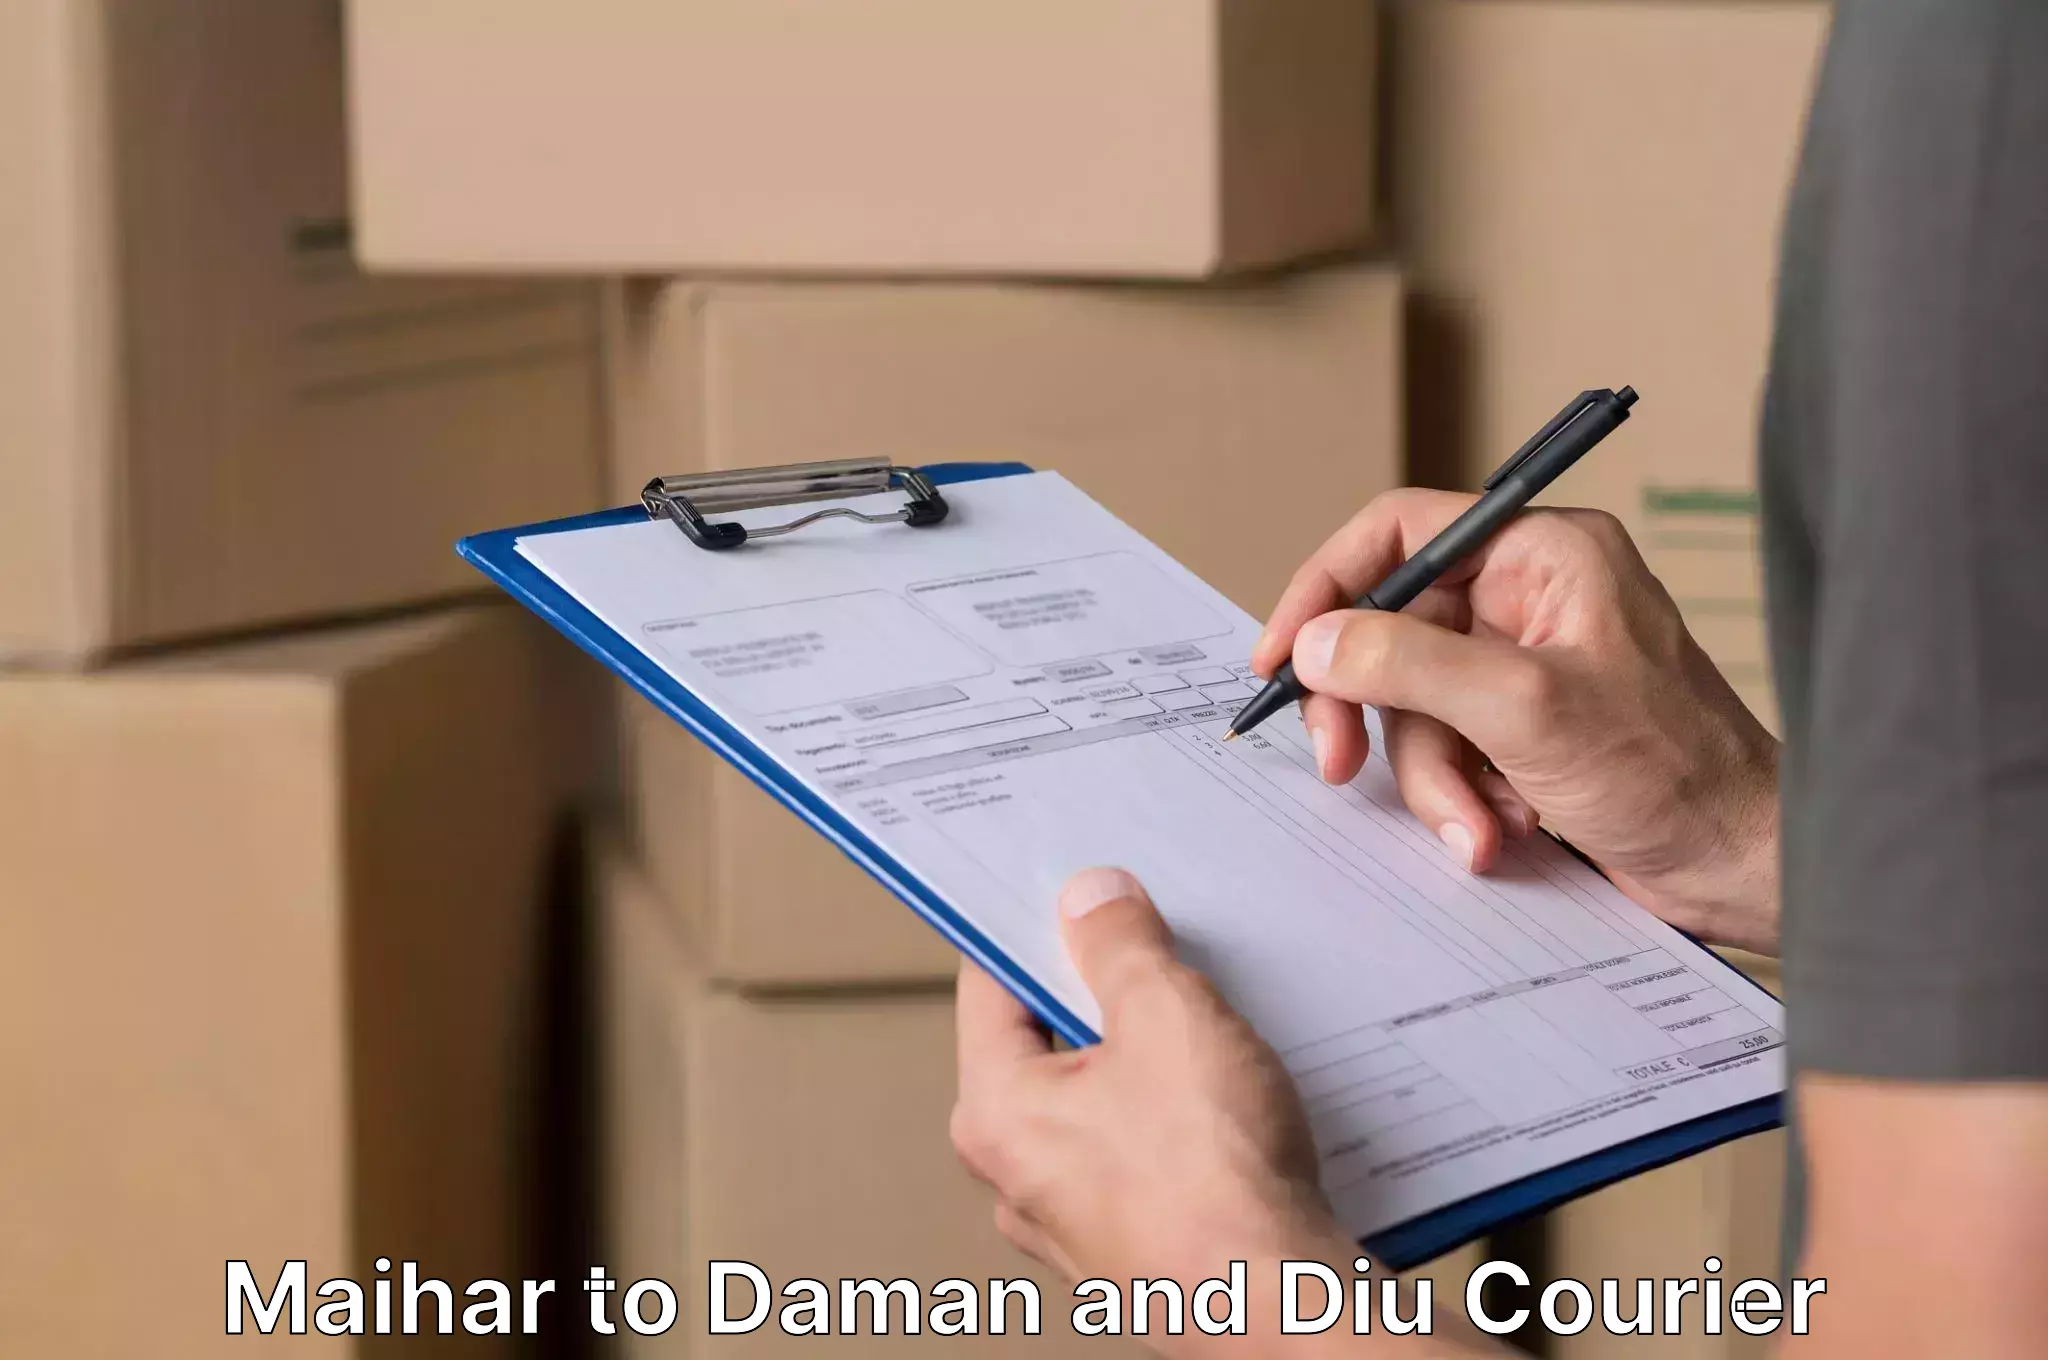 Moving and storage services Maihar to Daman and Diu